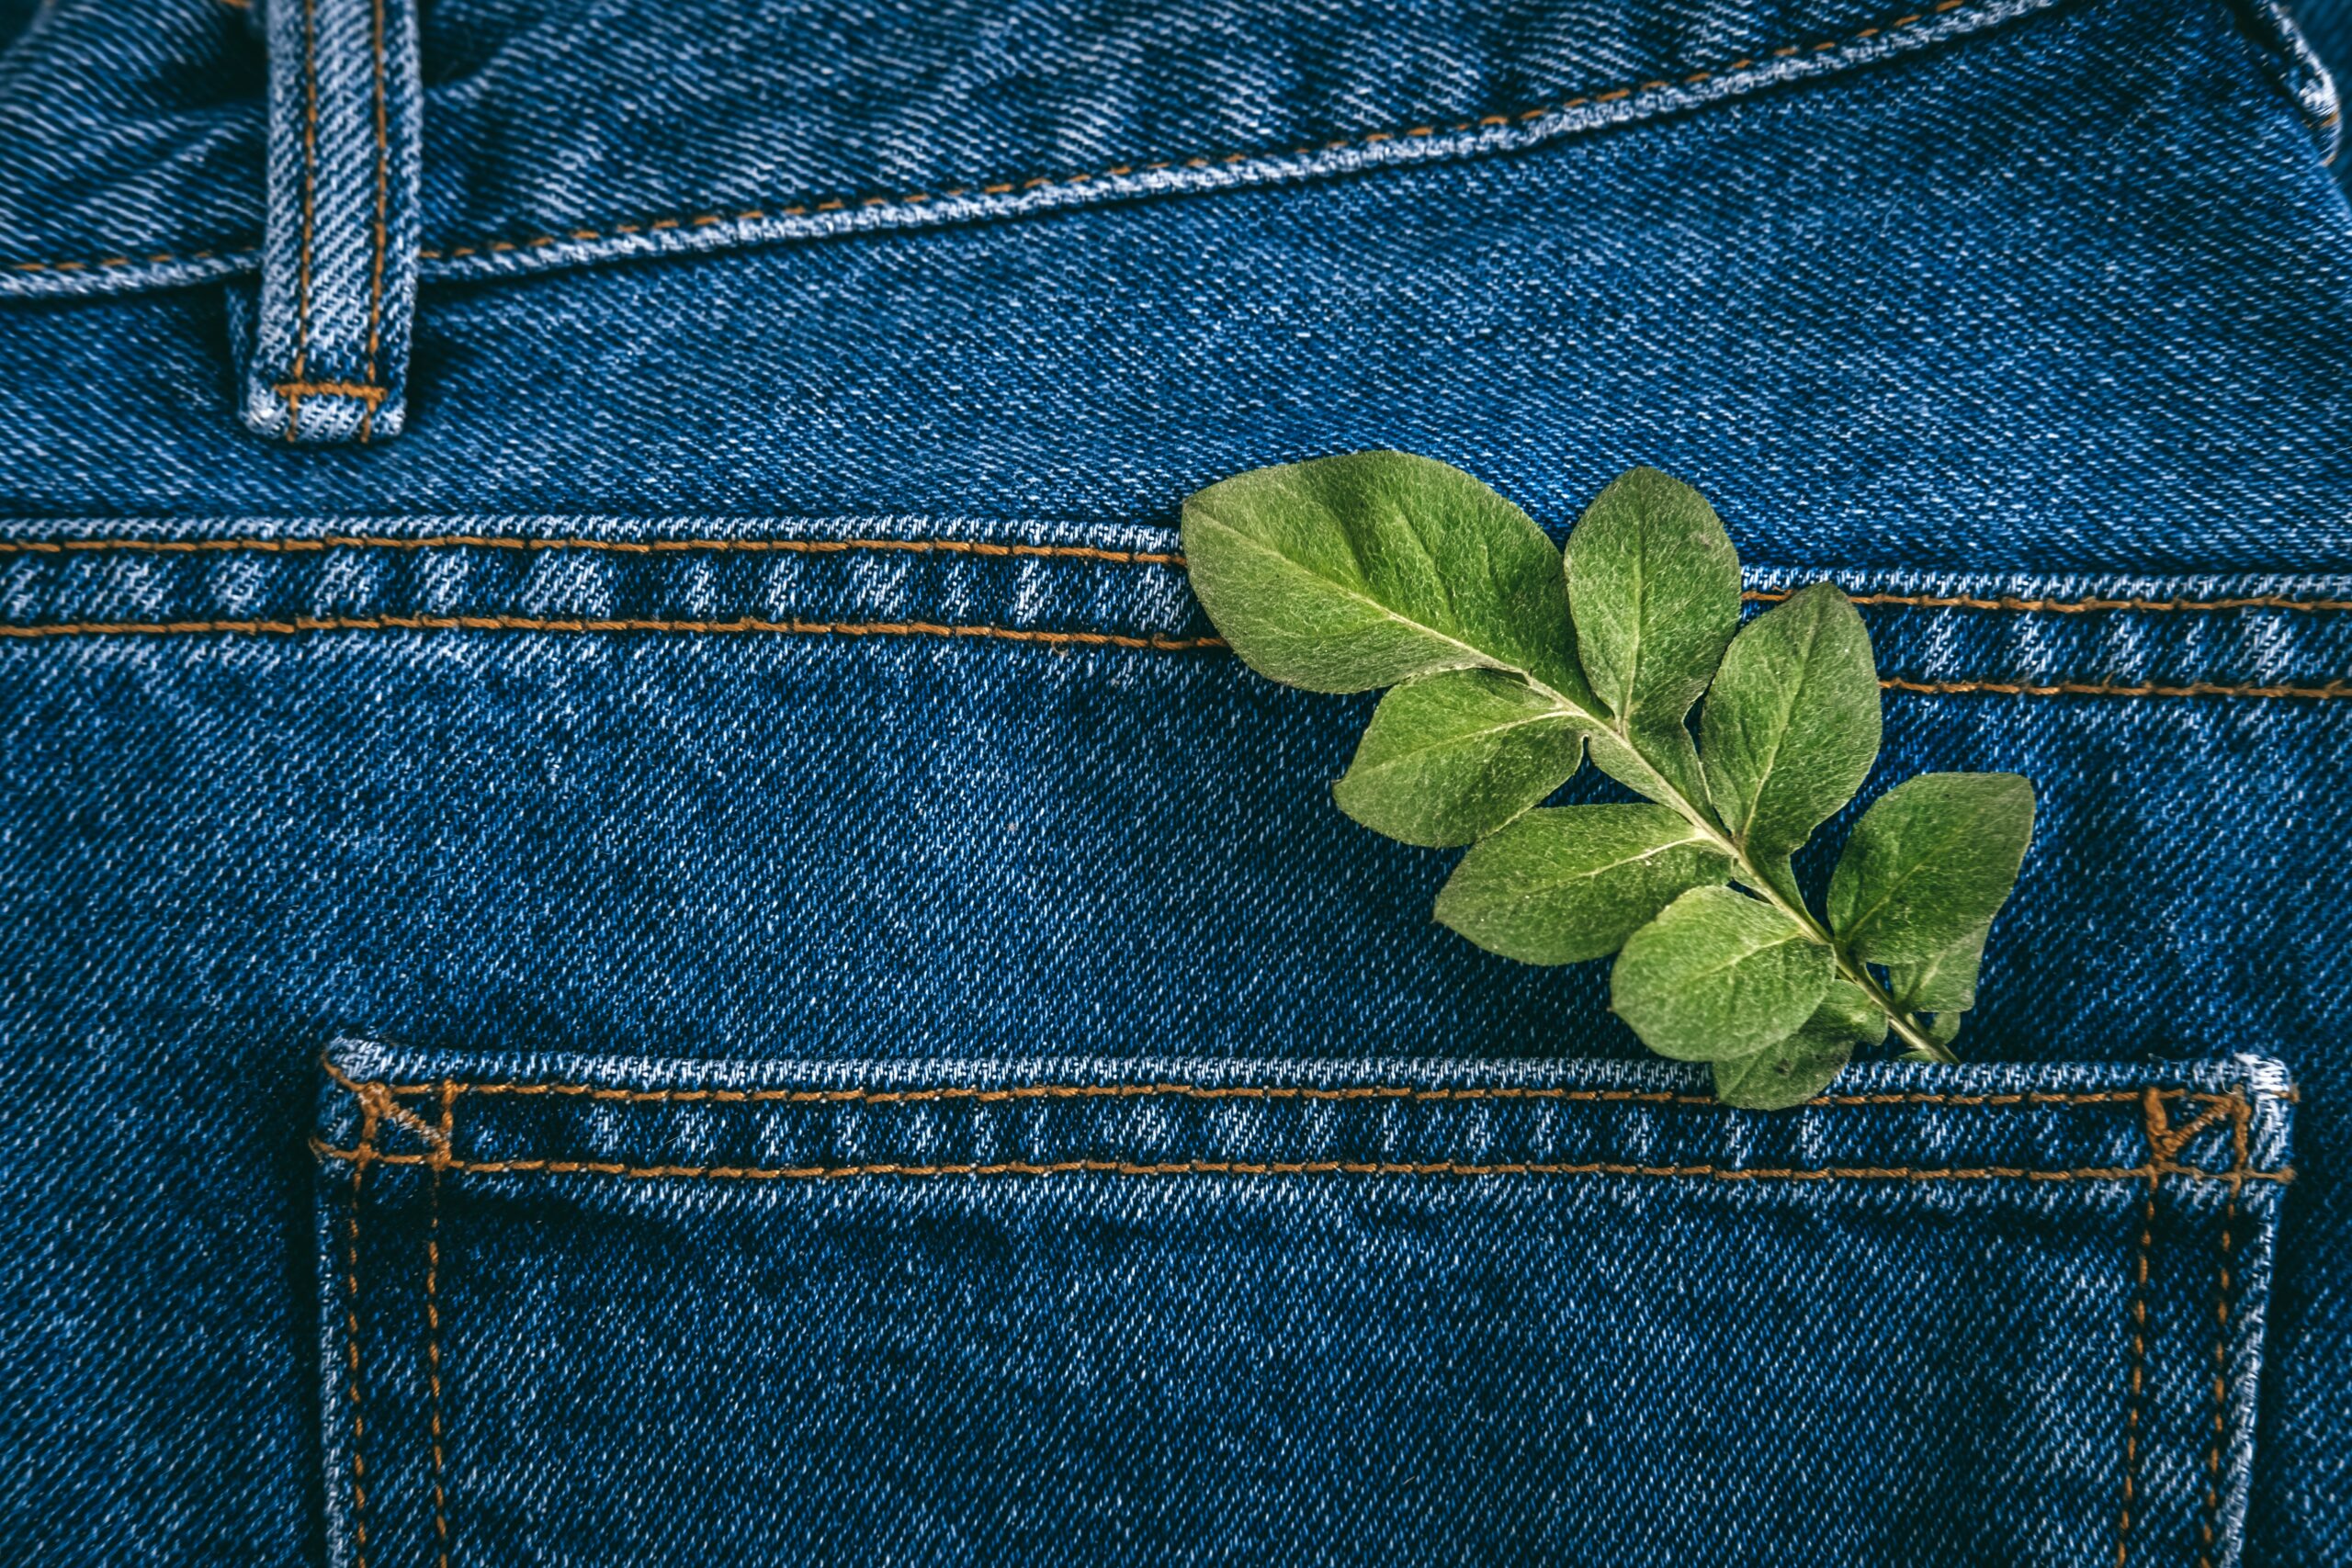 Madewell debuts jeans with bluesign-approved Isko fabrics